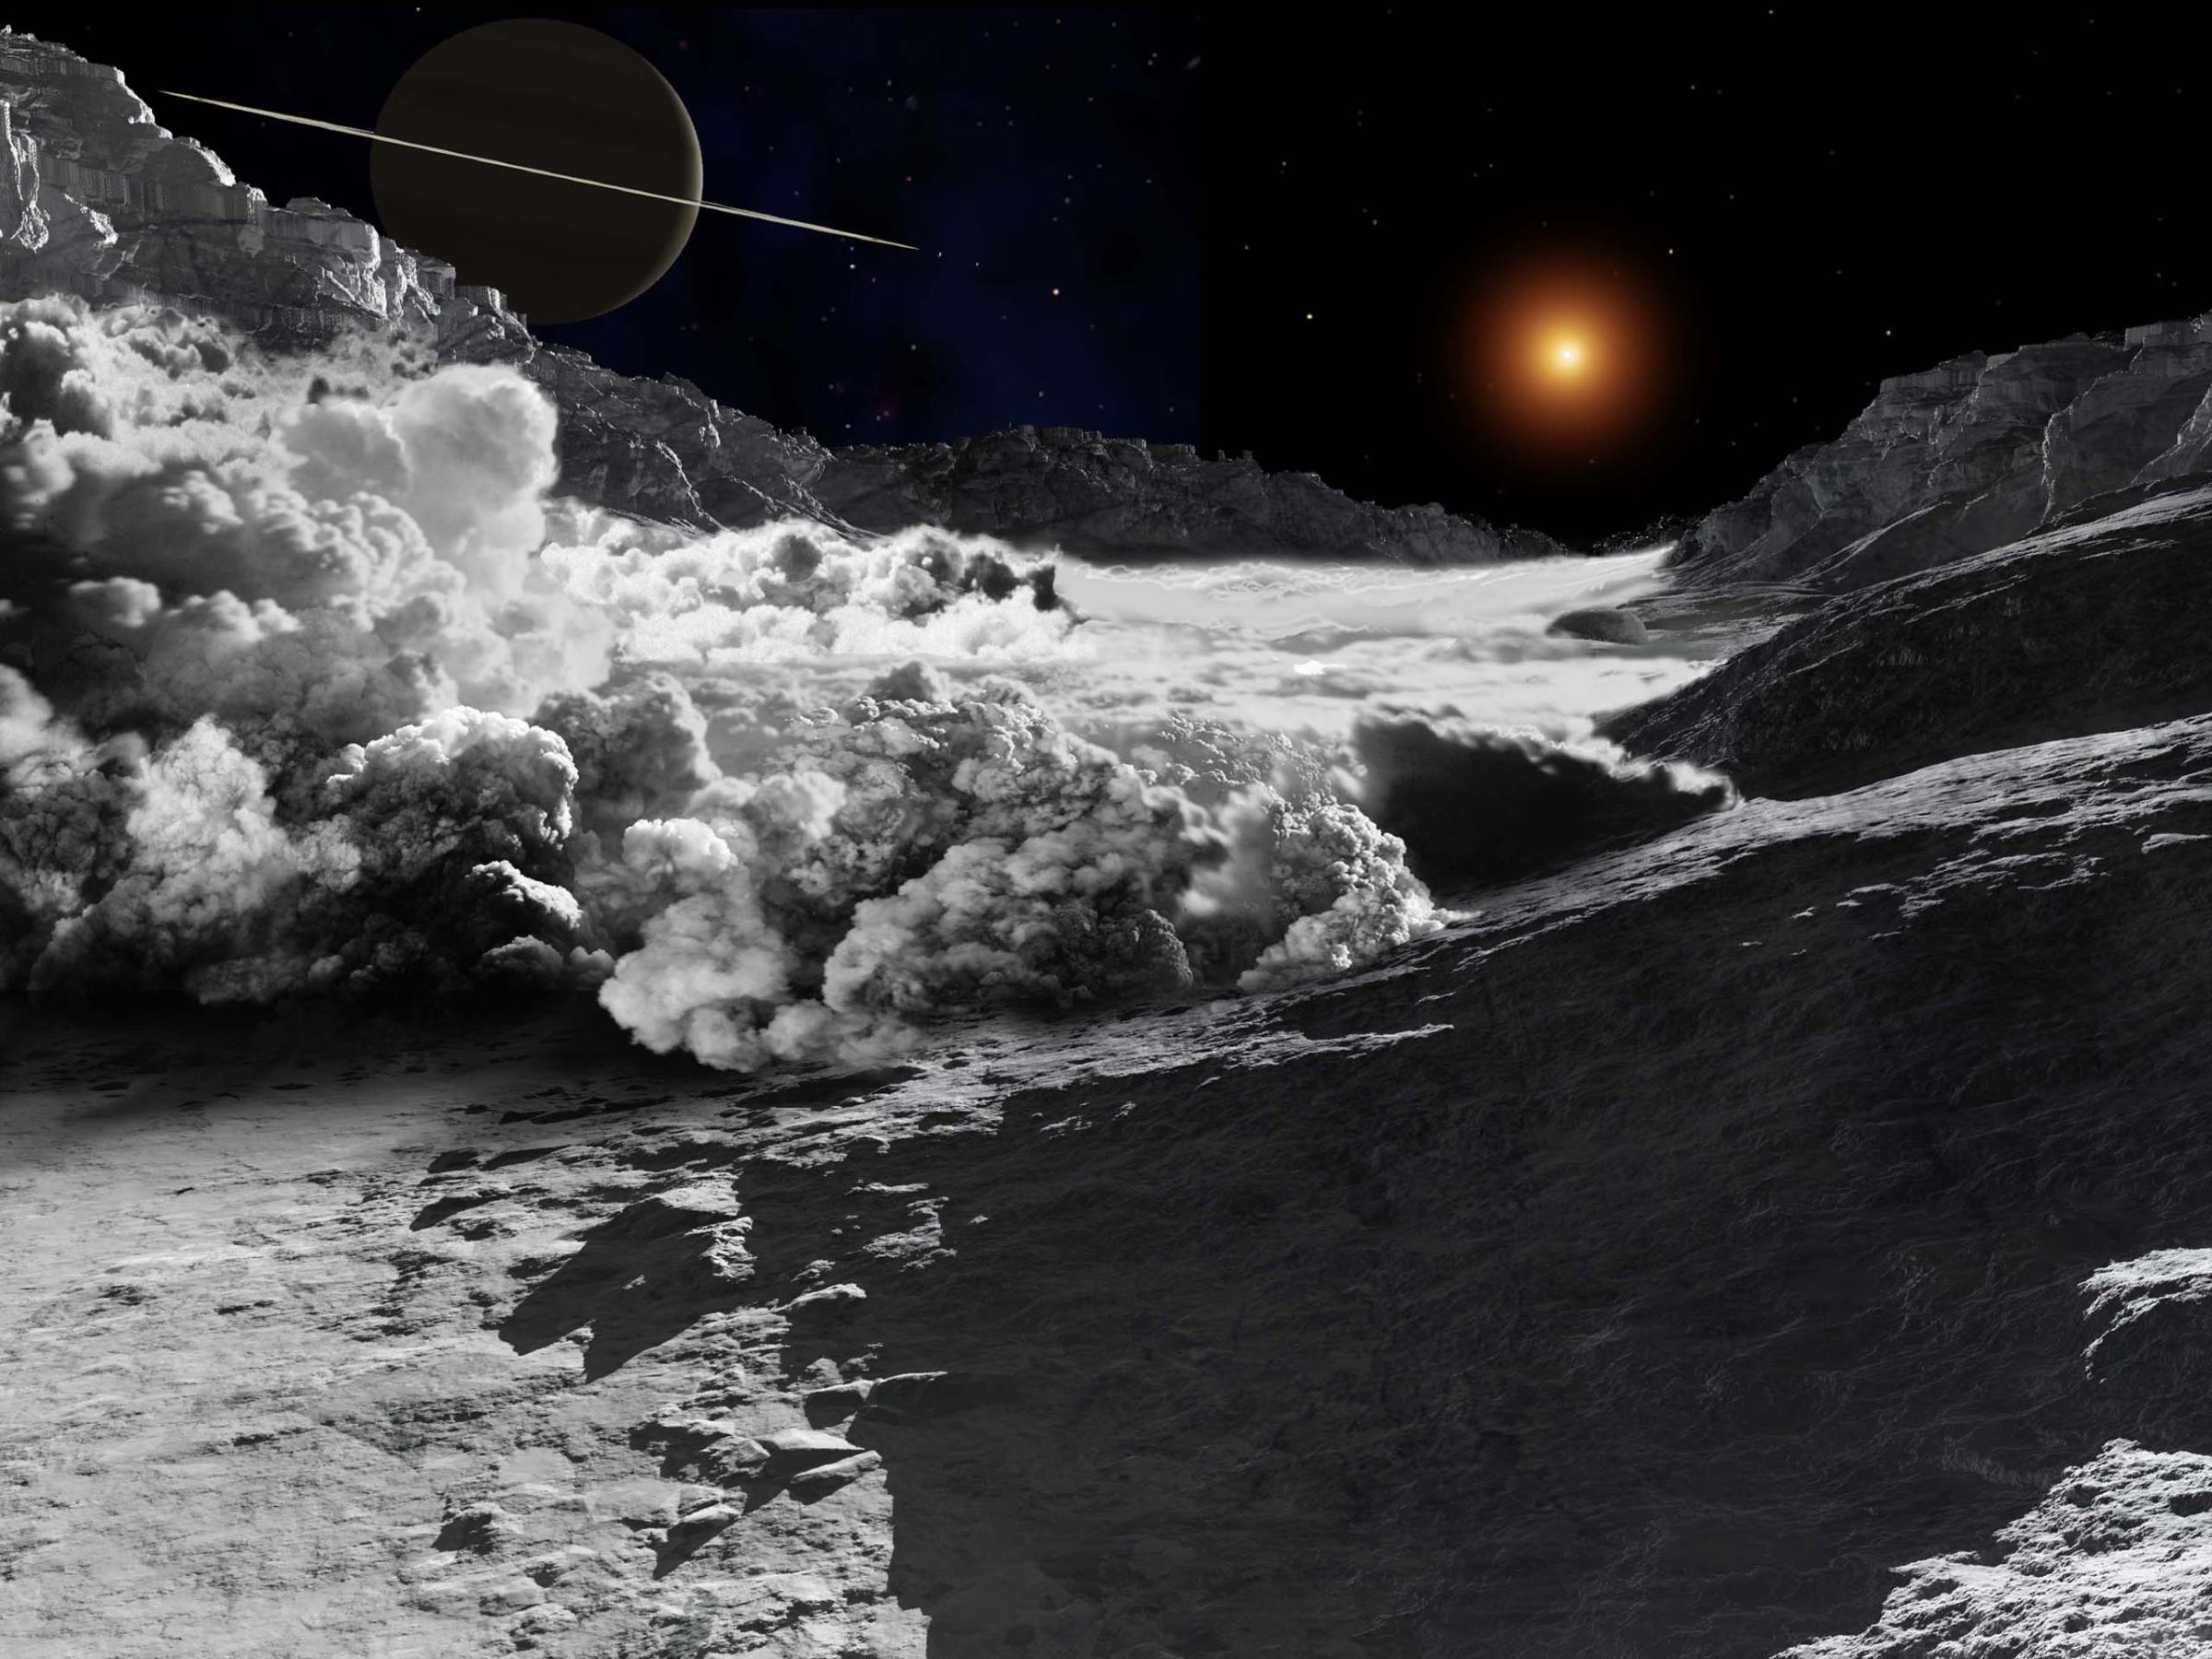 Avalanche on Iapetus, one of Saturn's moons